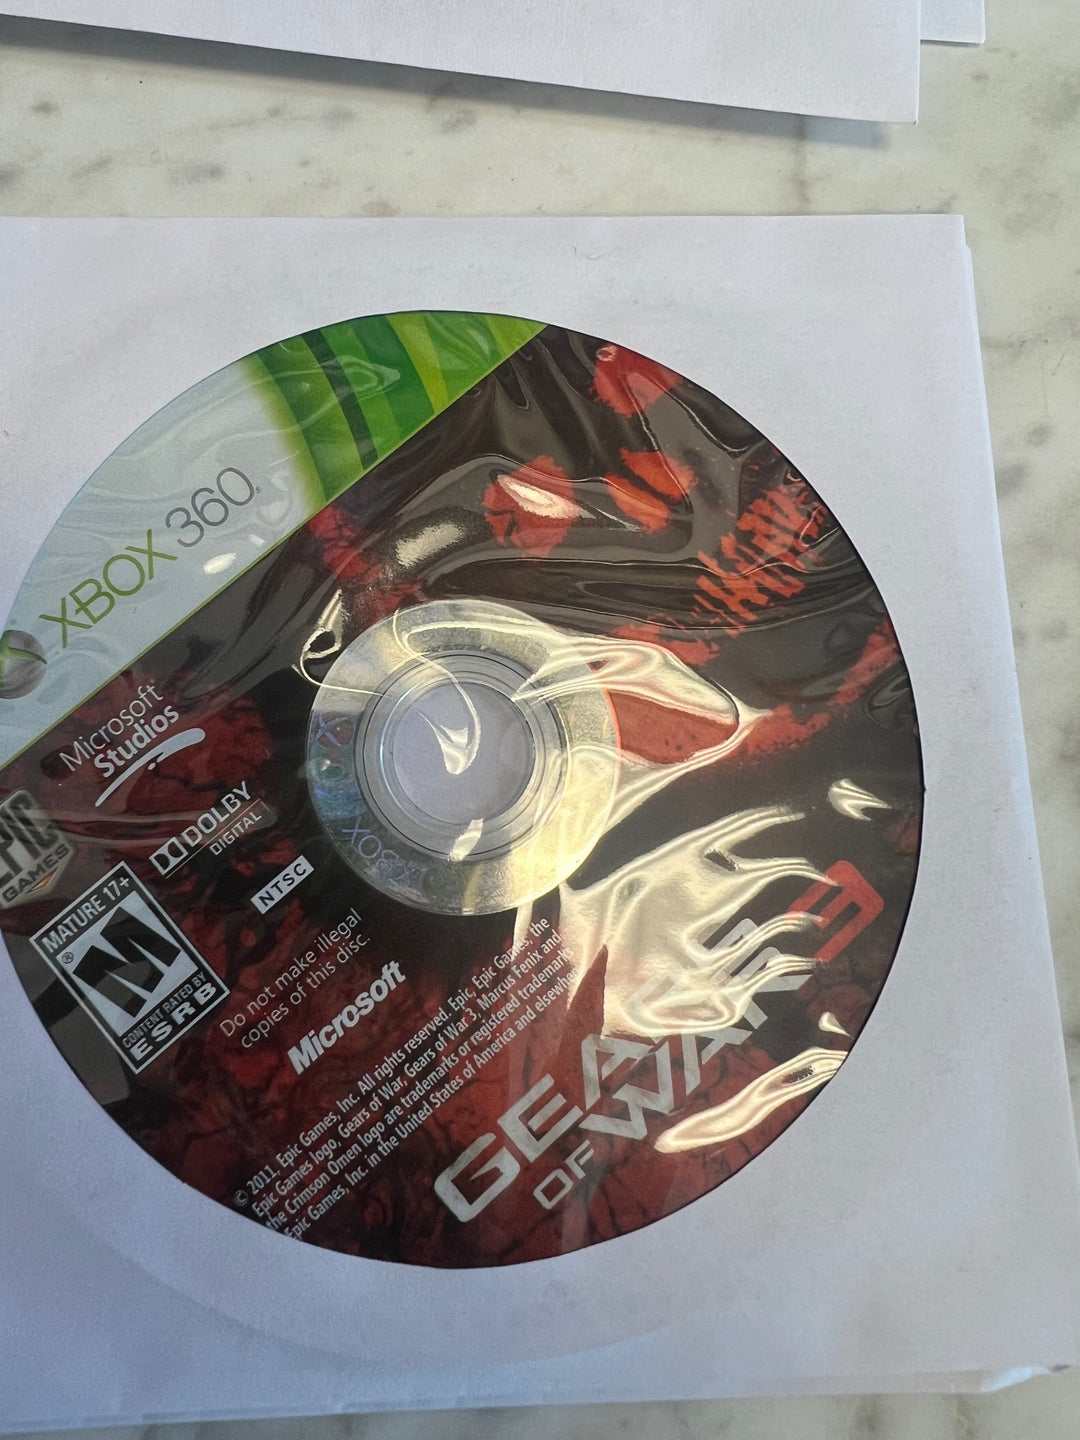 Gears of War 3 for Xbox 360 Disc Only No Case/Manual DU62724